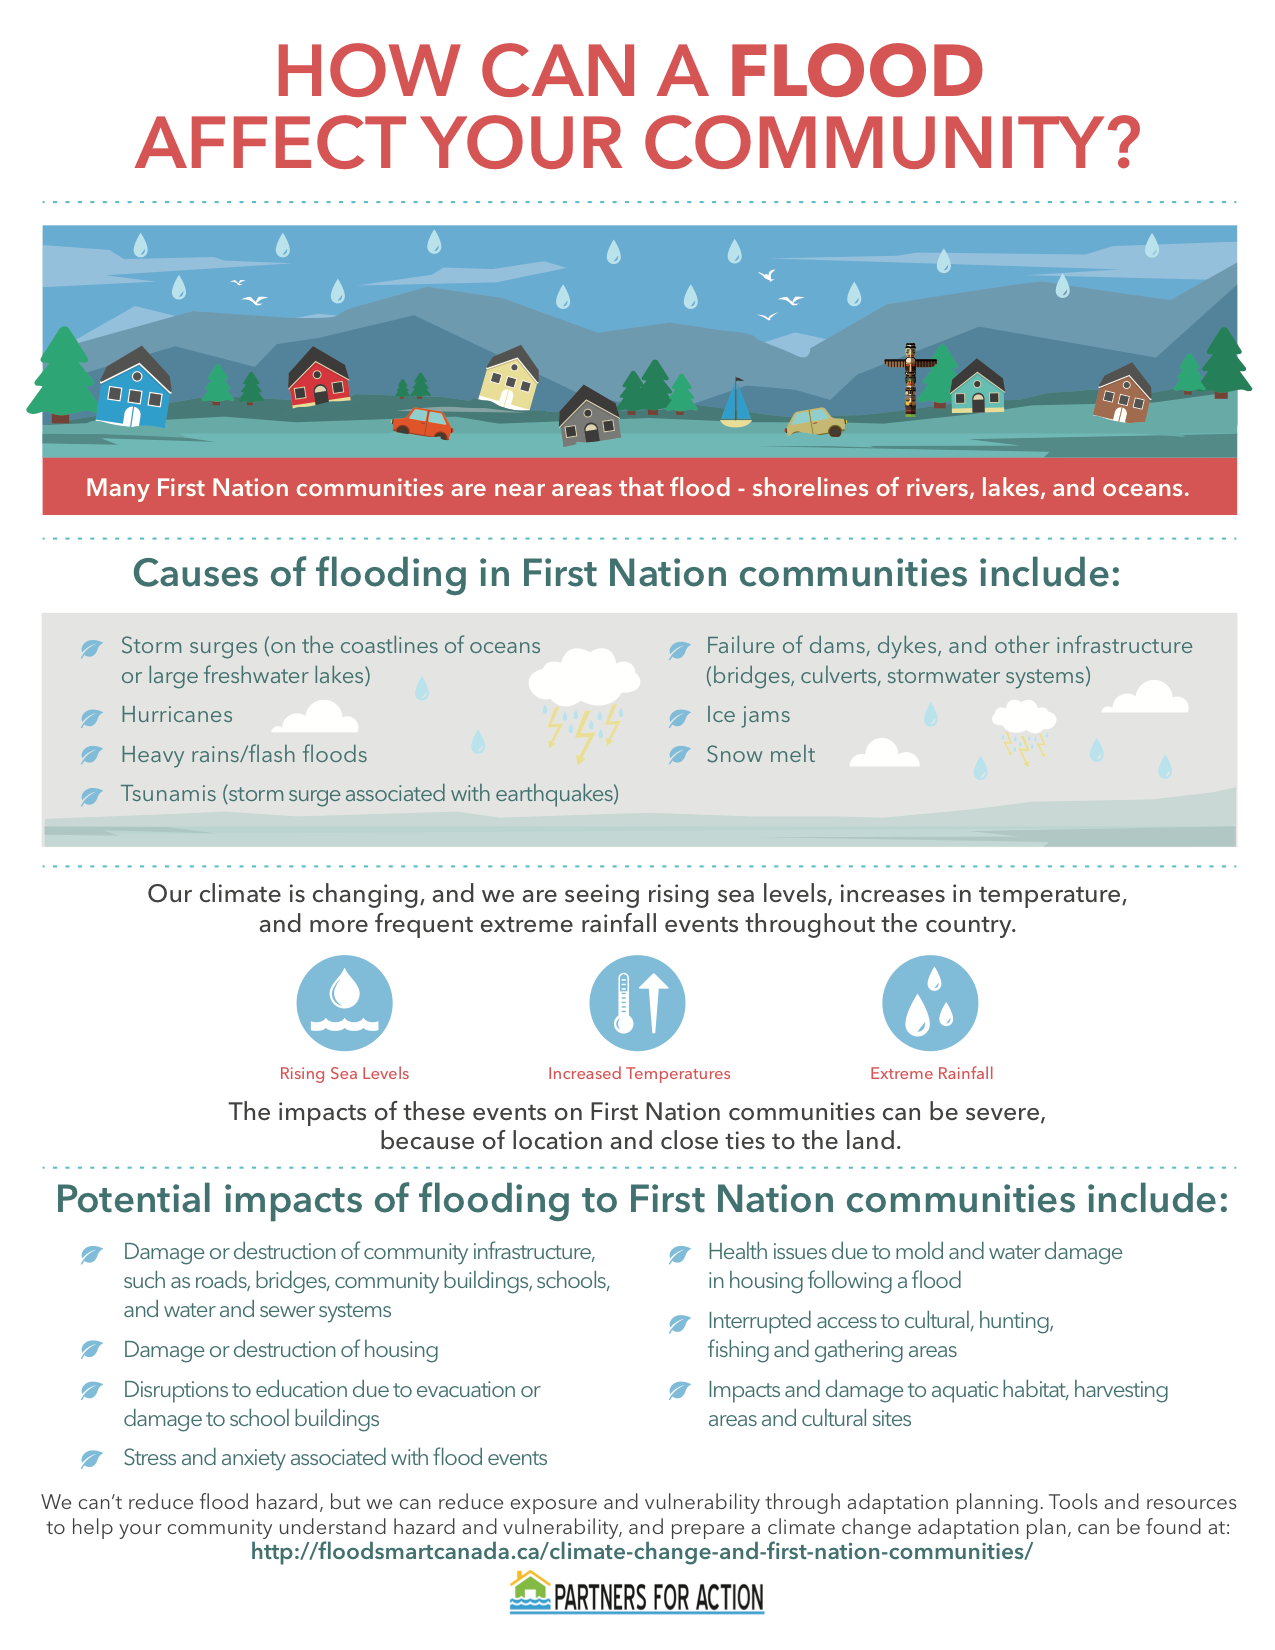 How flooding affects your community infographic